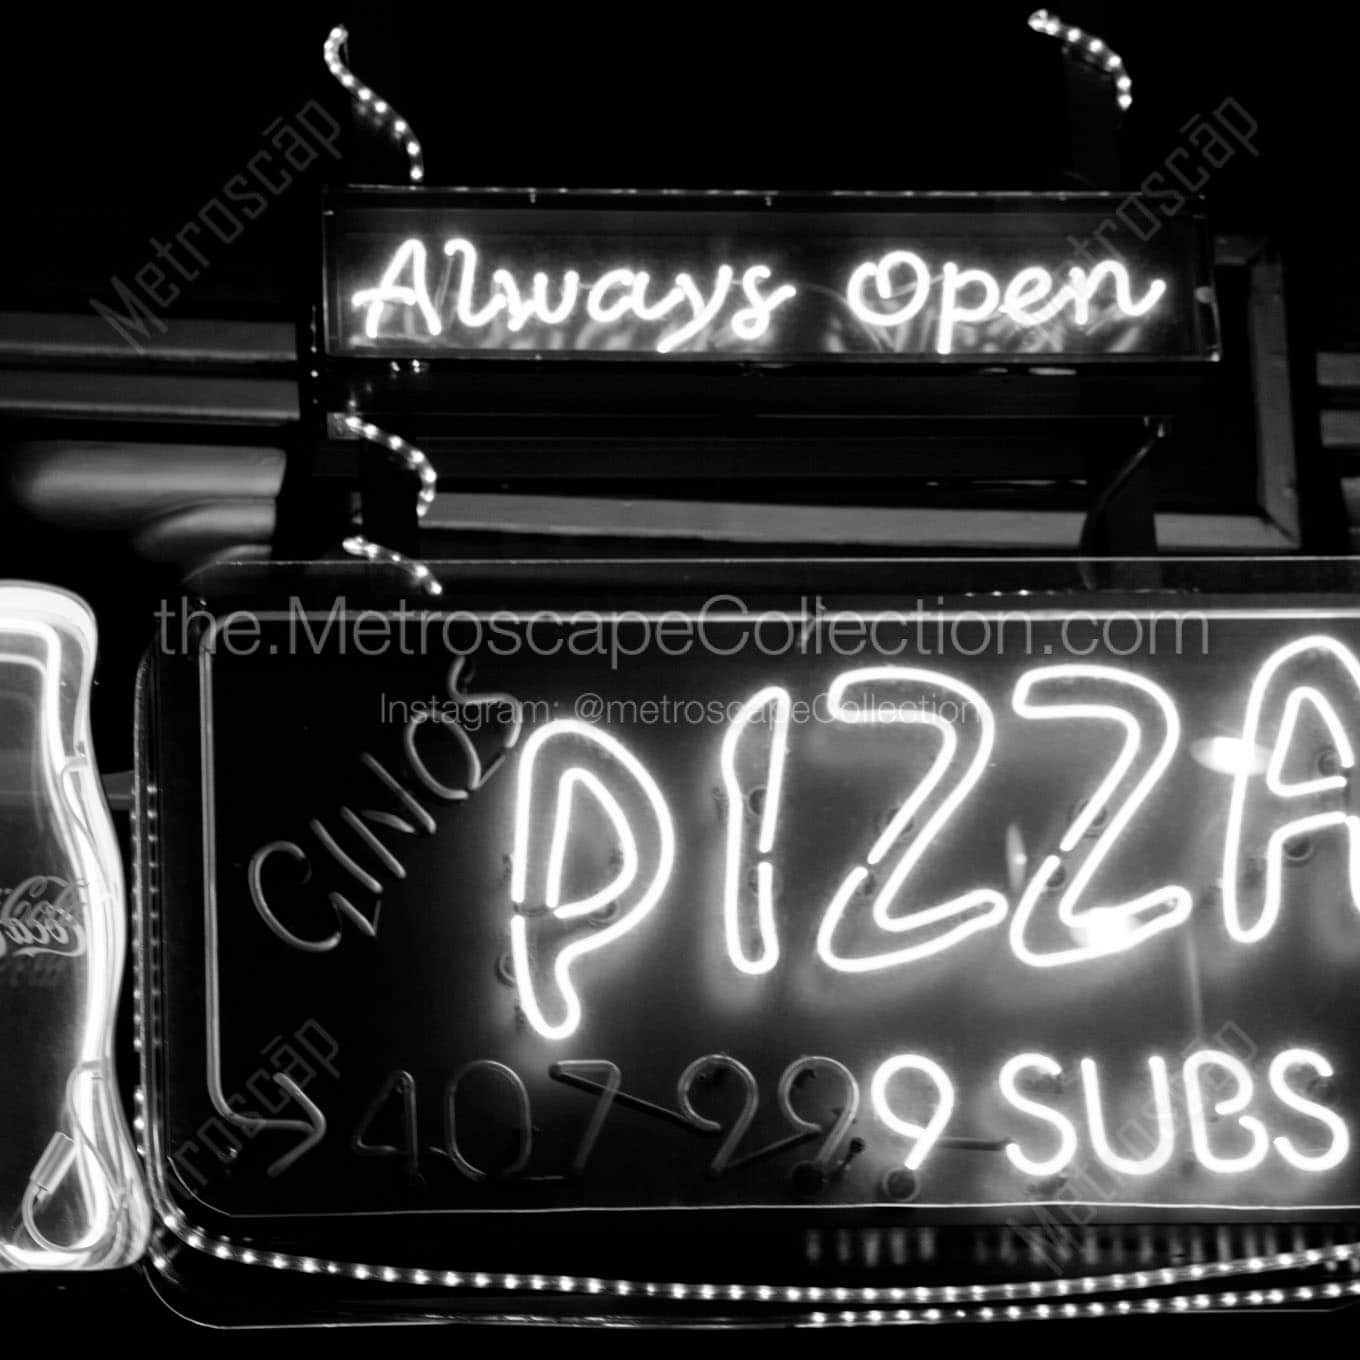 ginos pizza and subs Black & White Office Art